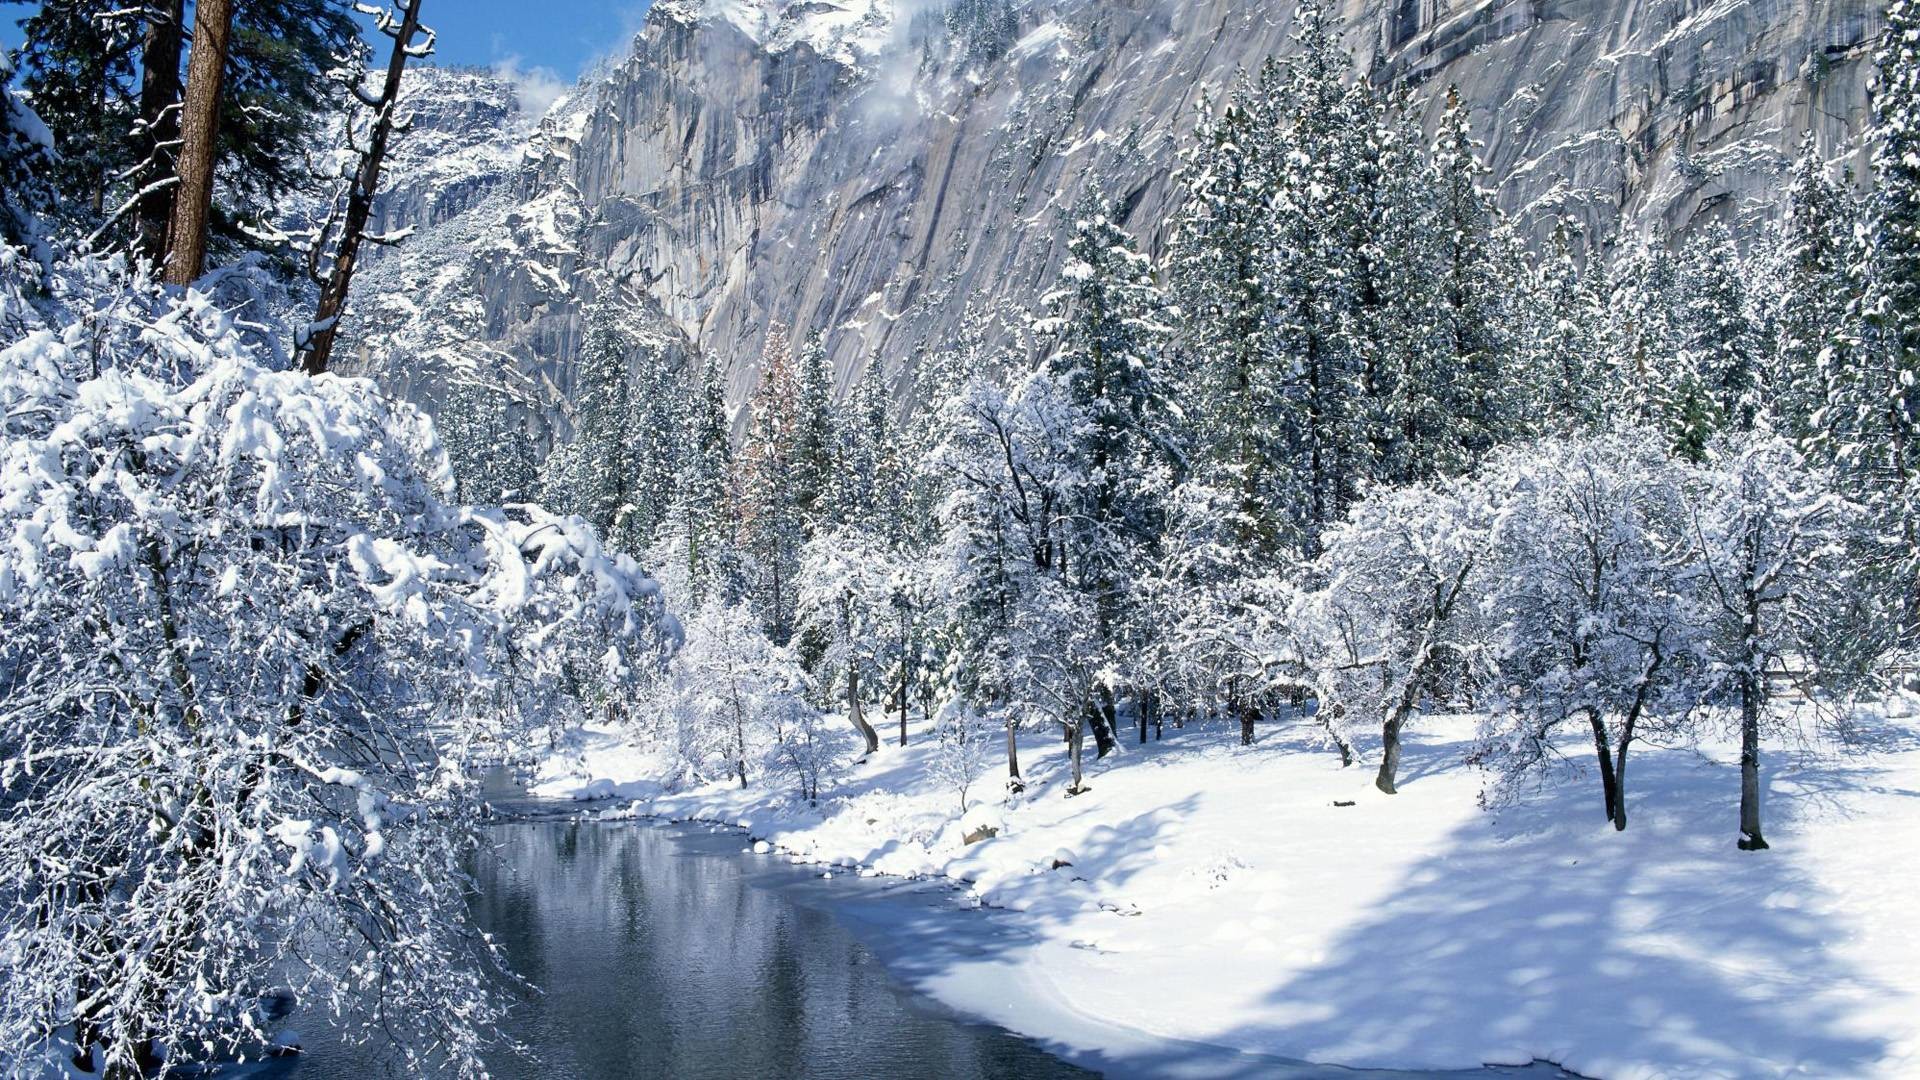 1920x1080 Winter Wallpaper 1920X1080 Hd 6711 Hd Wallpapers in Nature - Telusers.